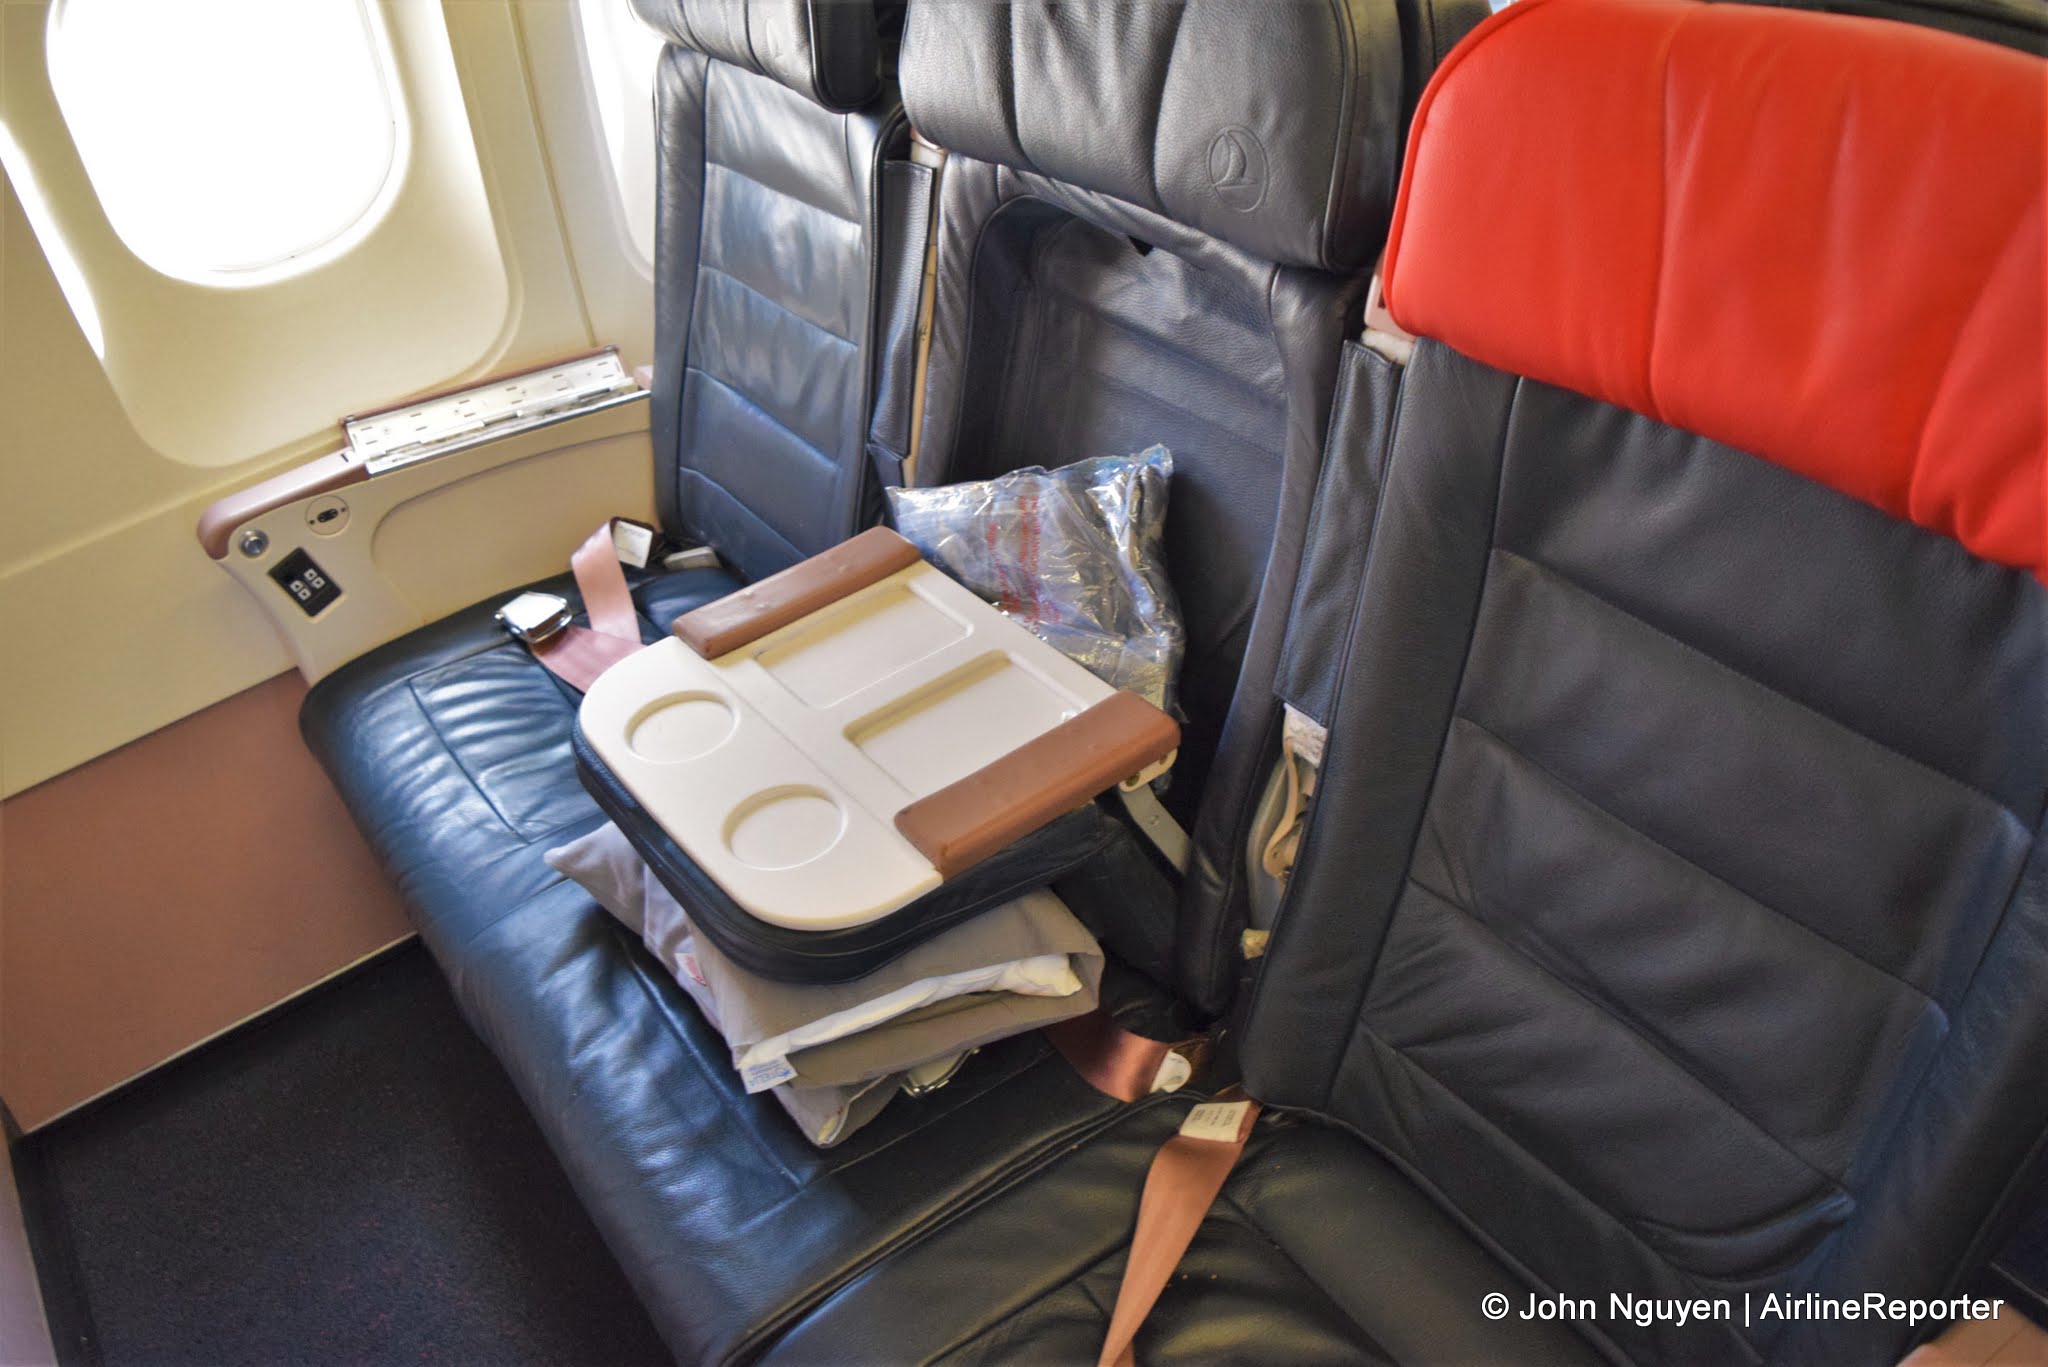 Flying Economy On A Turkish Airlines Airbus A321